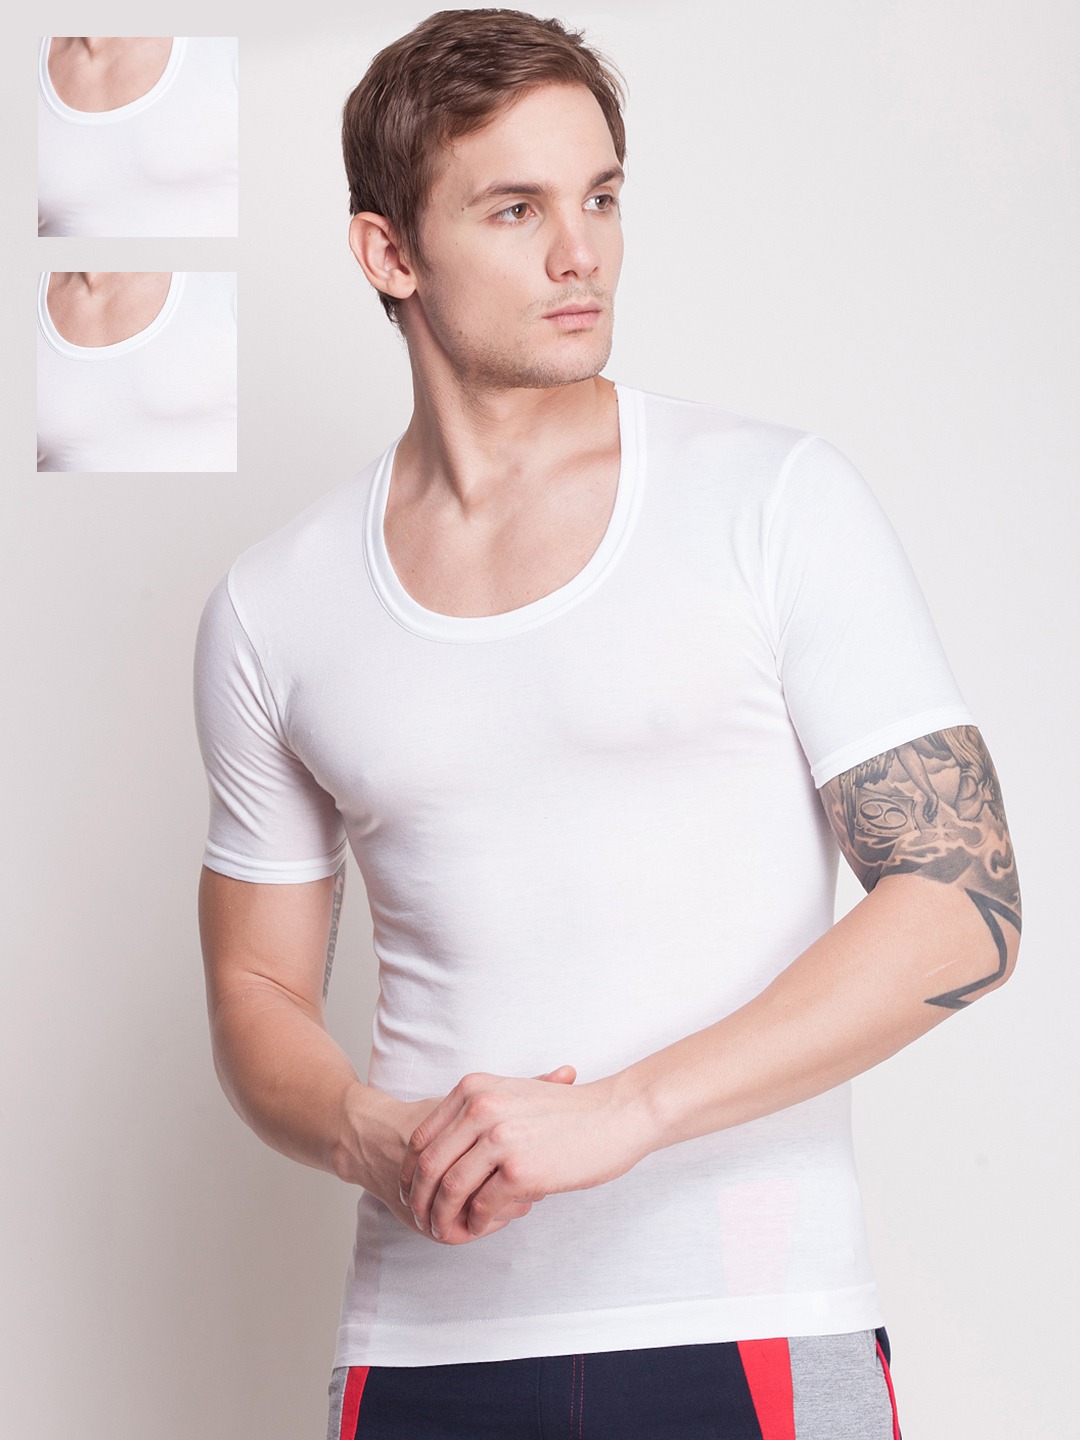 Clothing Innerwear Vests | Force NXT Pack of 3 White Assorted Innerwear Vests MNFF-142-po3 - DN36890